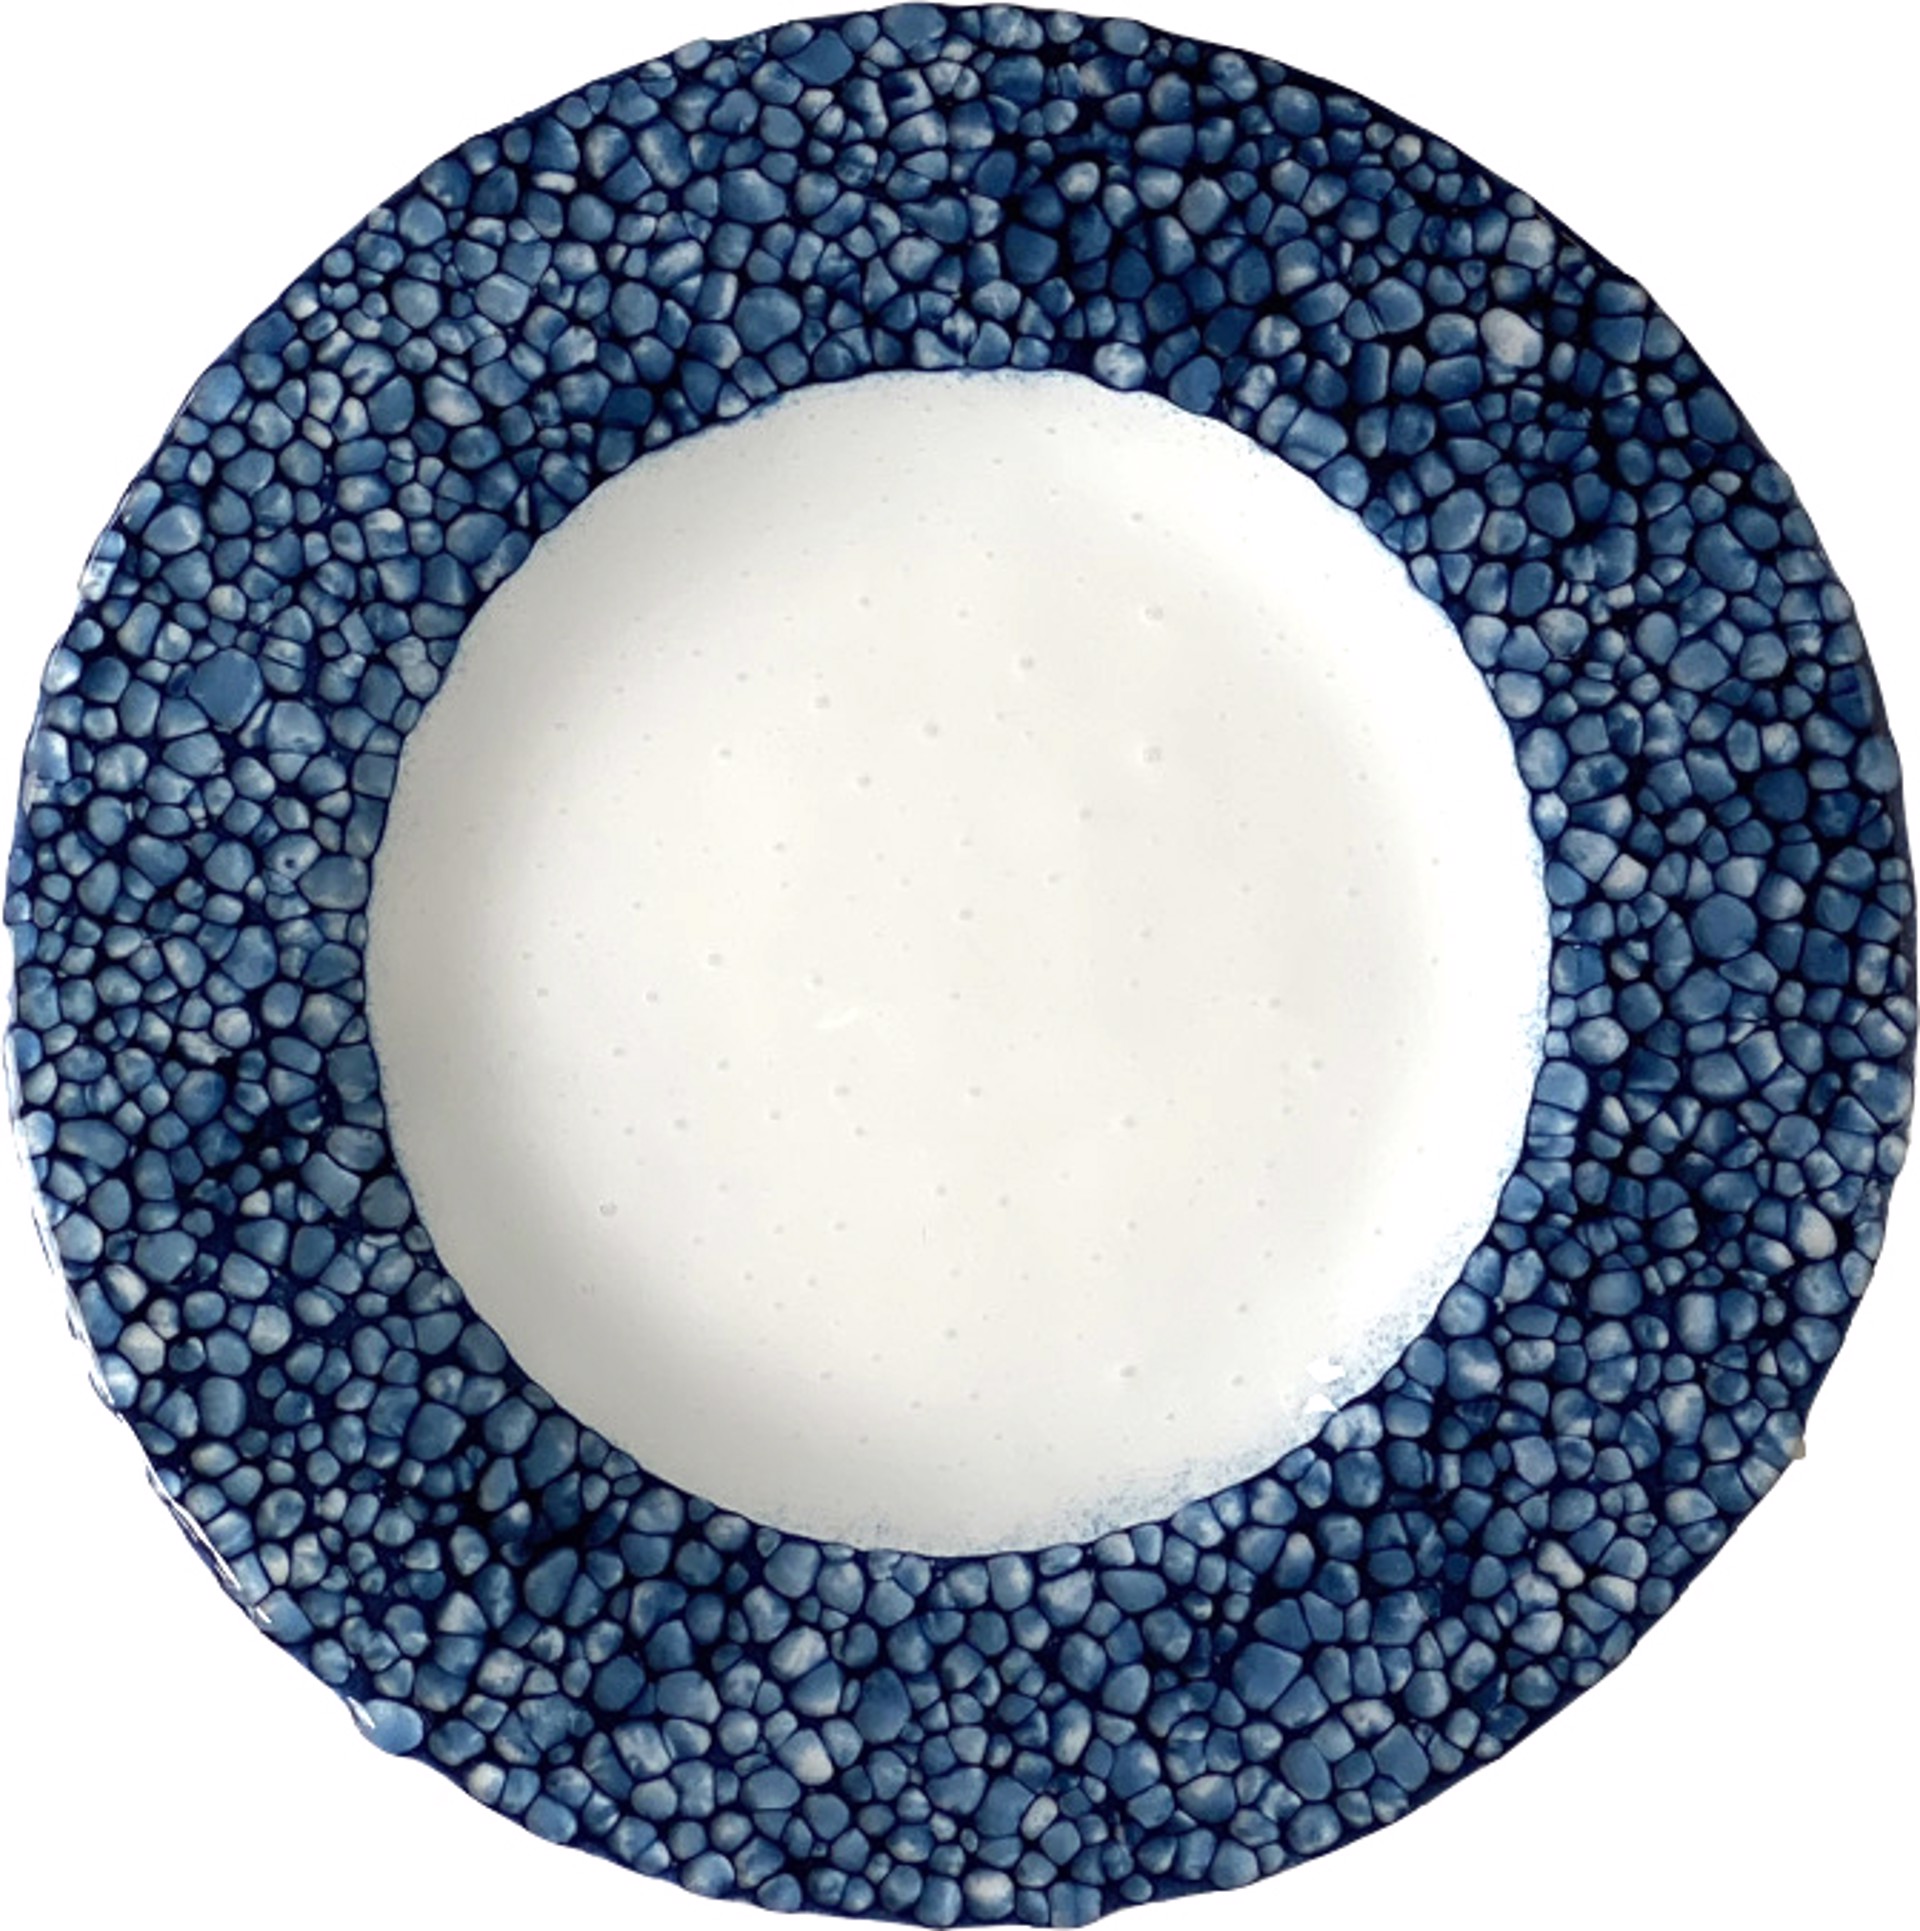 White Plate with Blue Border by Jennifer Welch